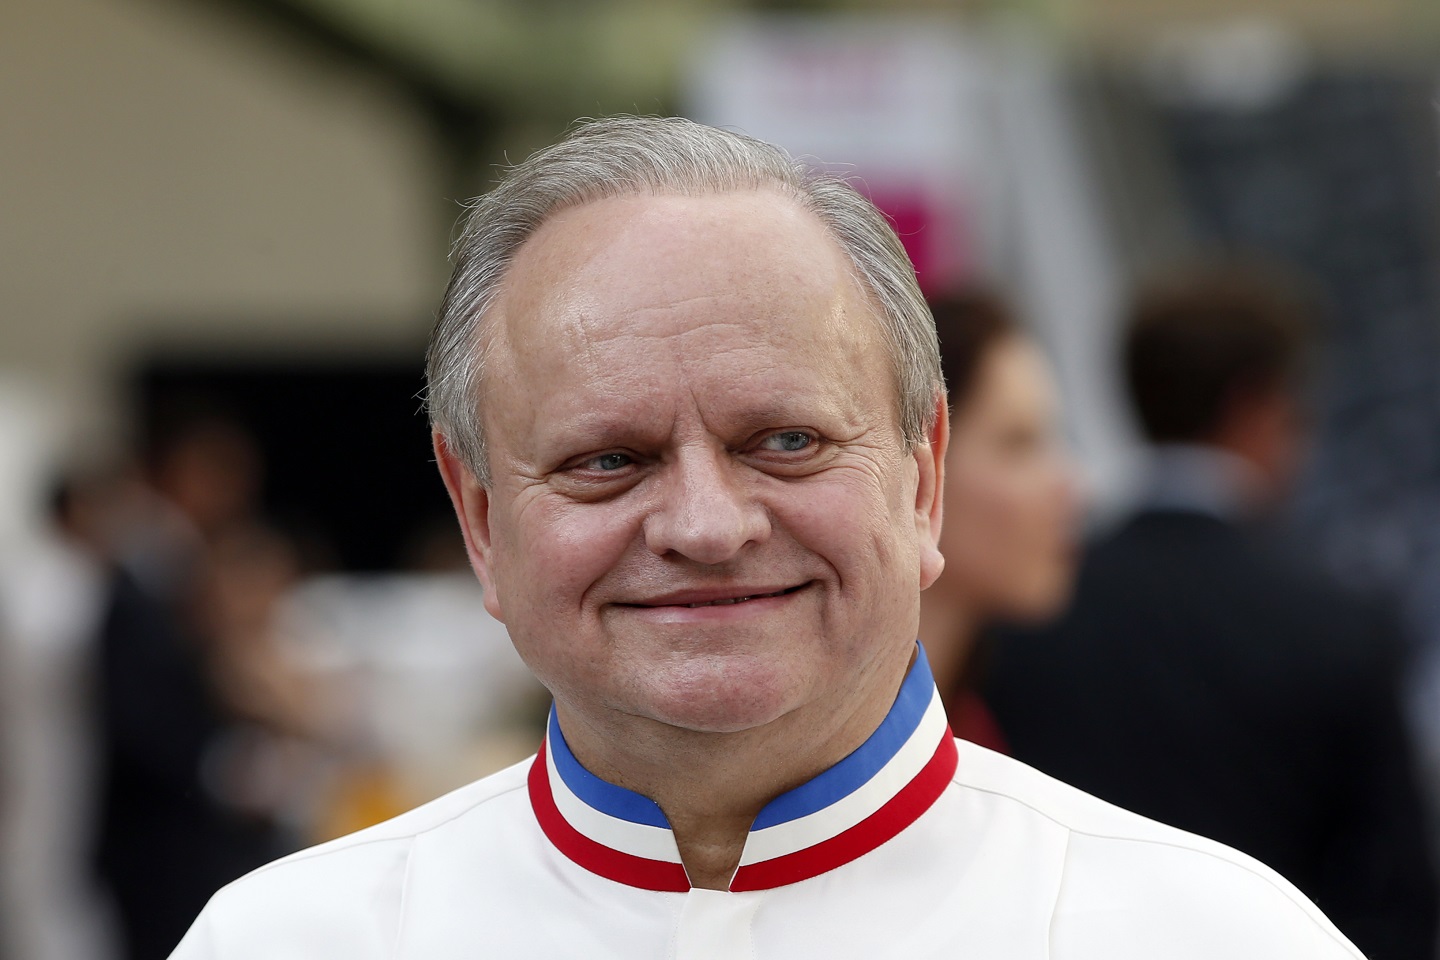 World mourns loss of "chef of the century" Joël Robuchon | Options, The